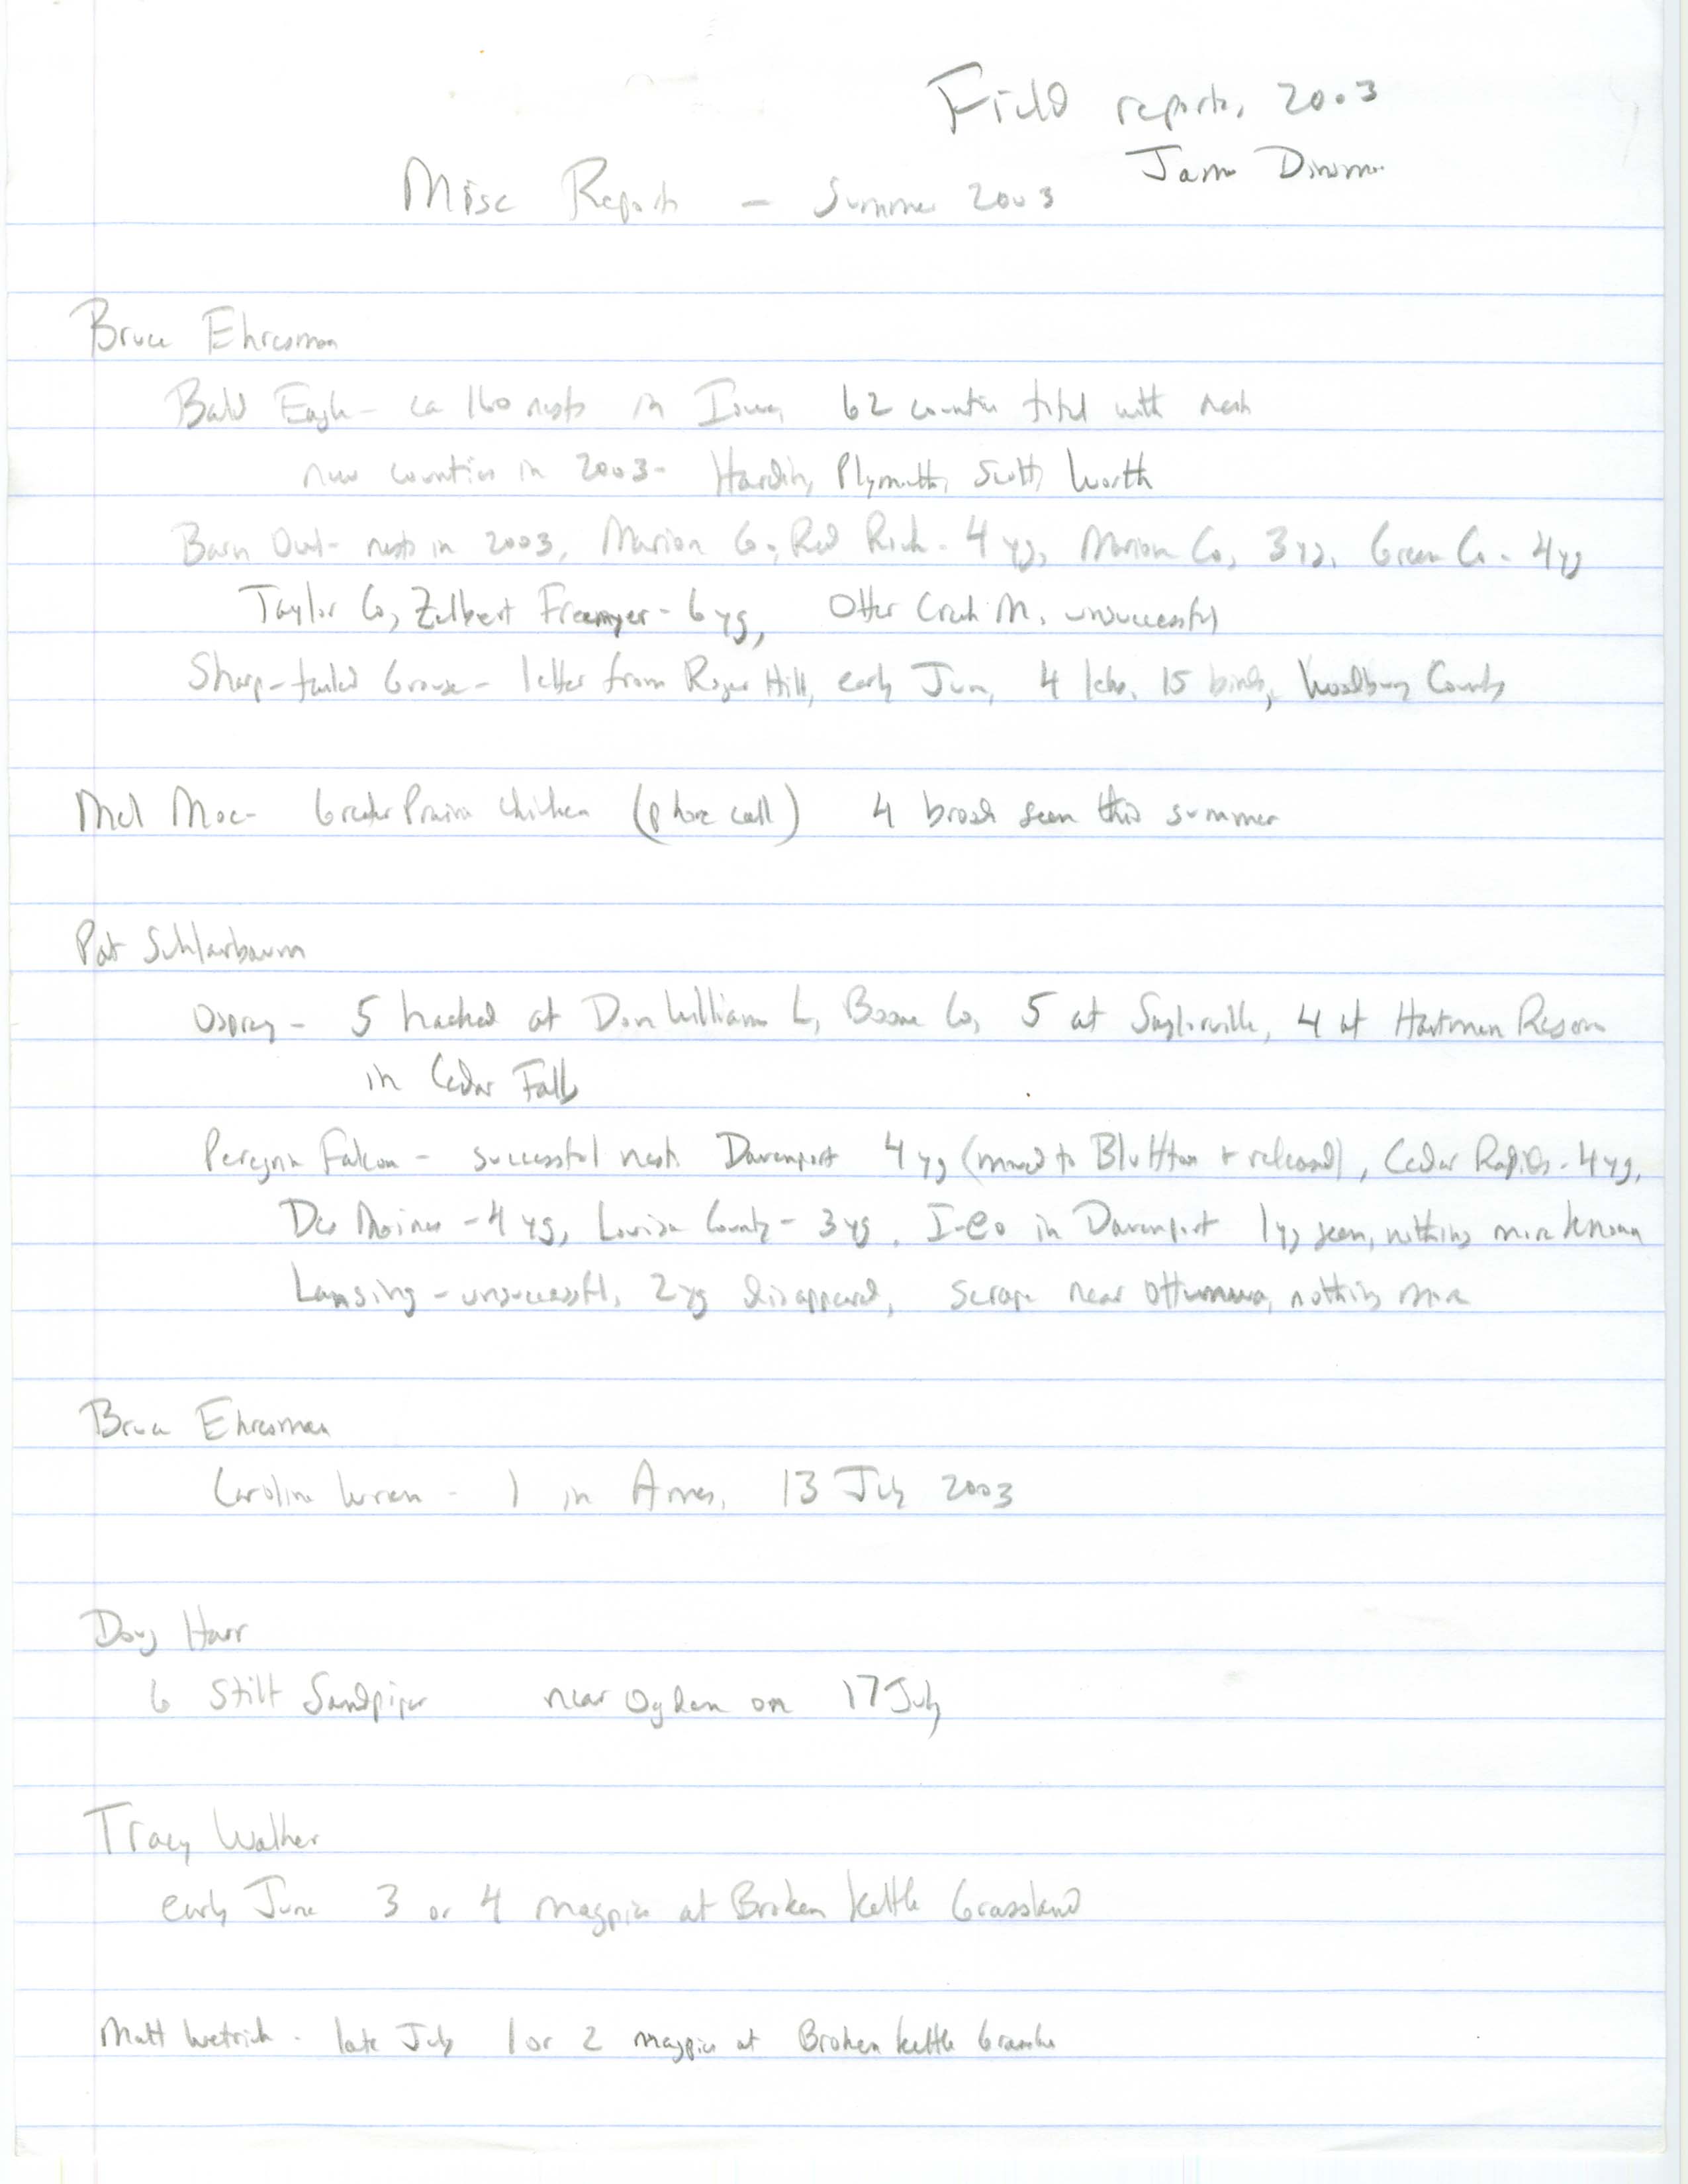 Field notes contributed by James J. Dinsmore regarding miscellaneous bird sightings, summer 2003